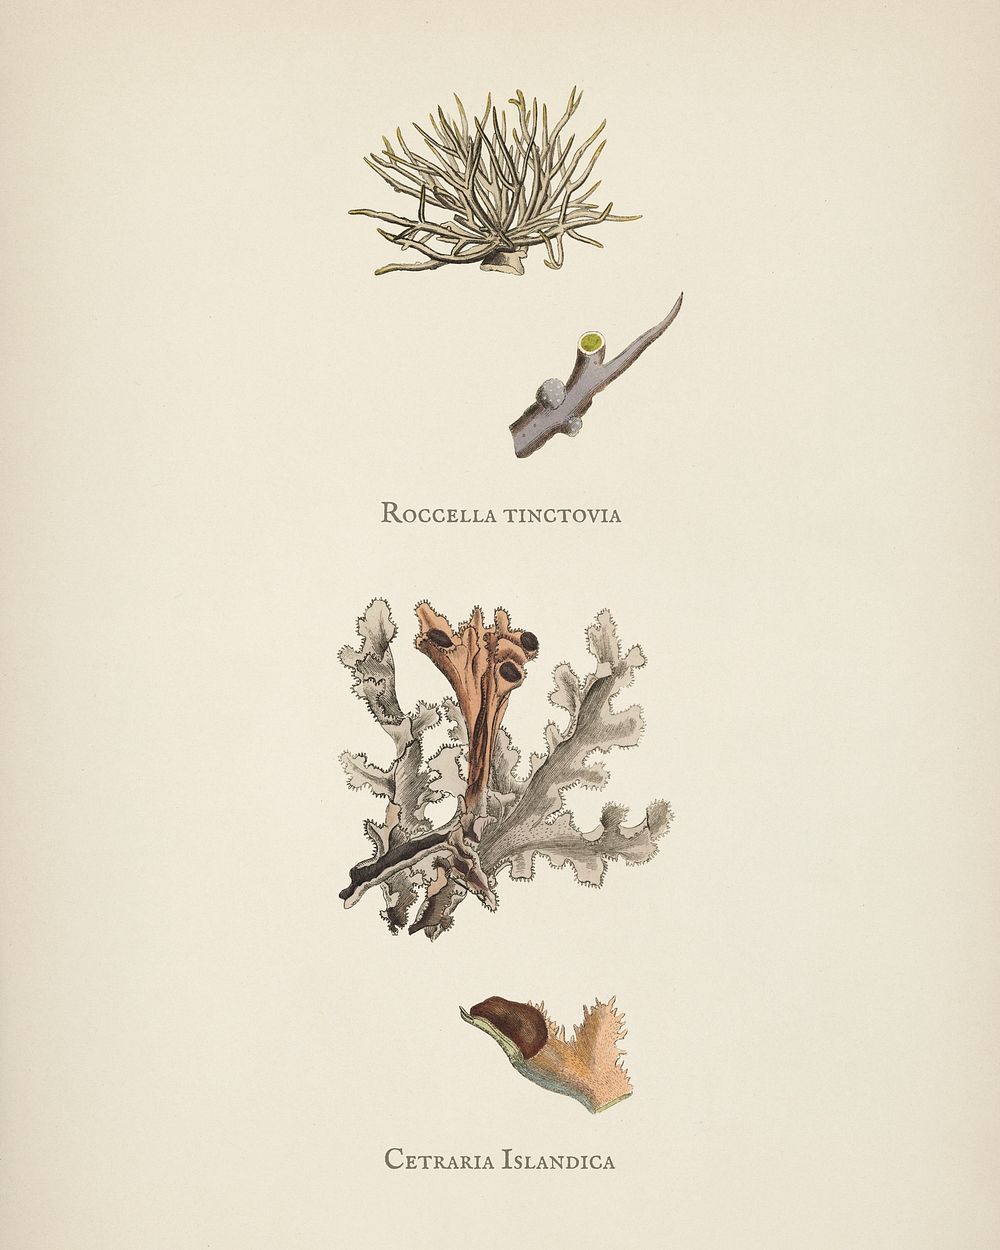 Iceland moss (Cetraria islandica) illustration from Medical Botany (1836) by John Stephenson and James Morss Churchill.